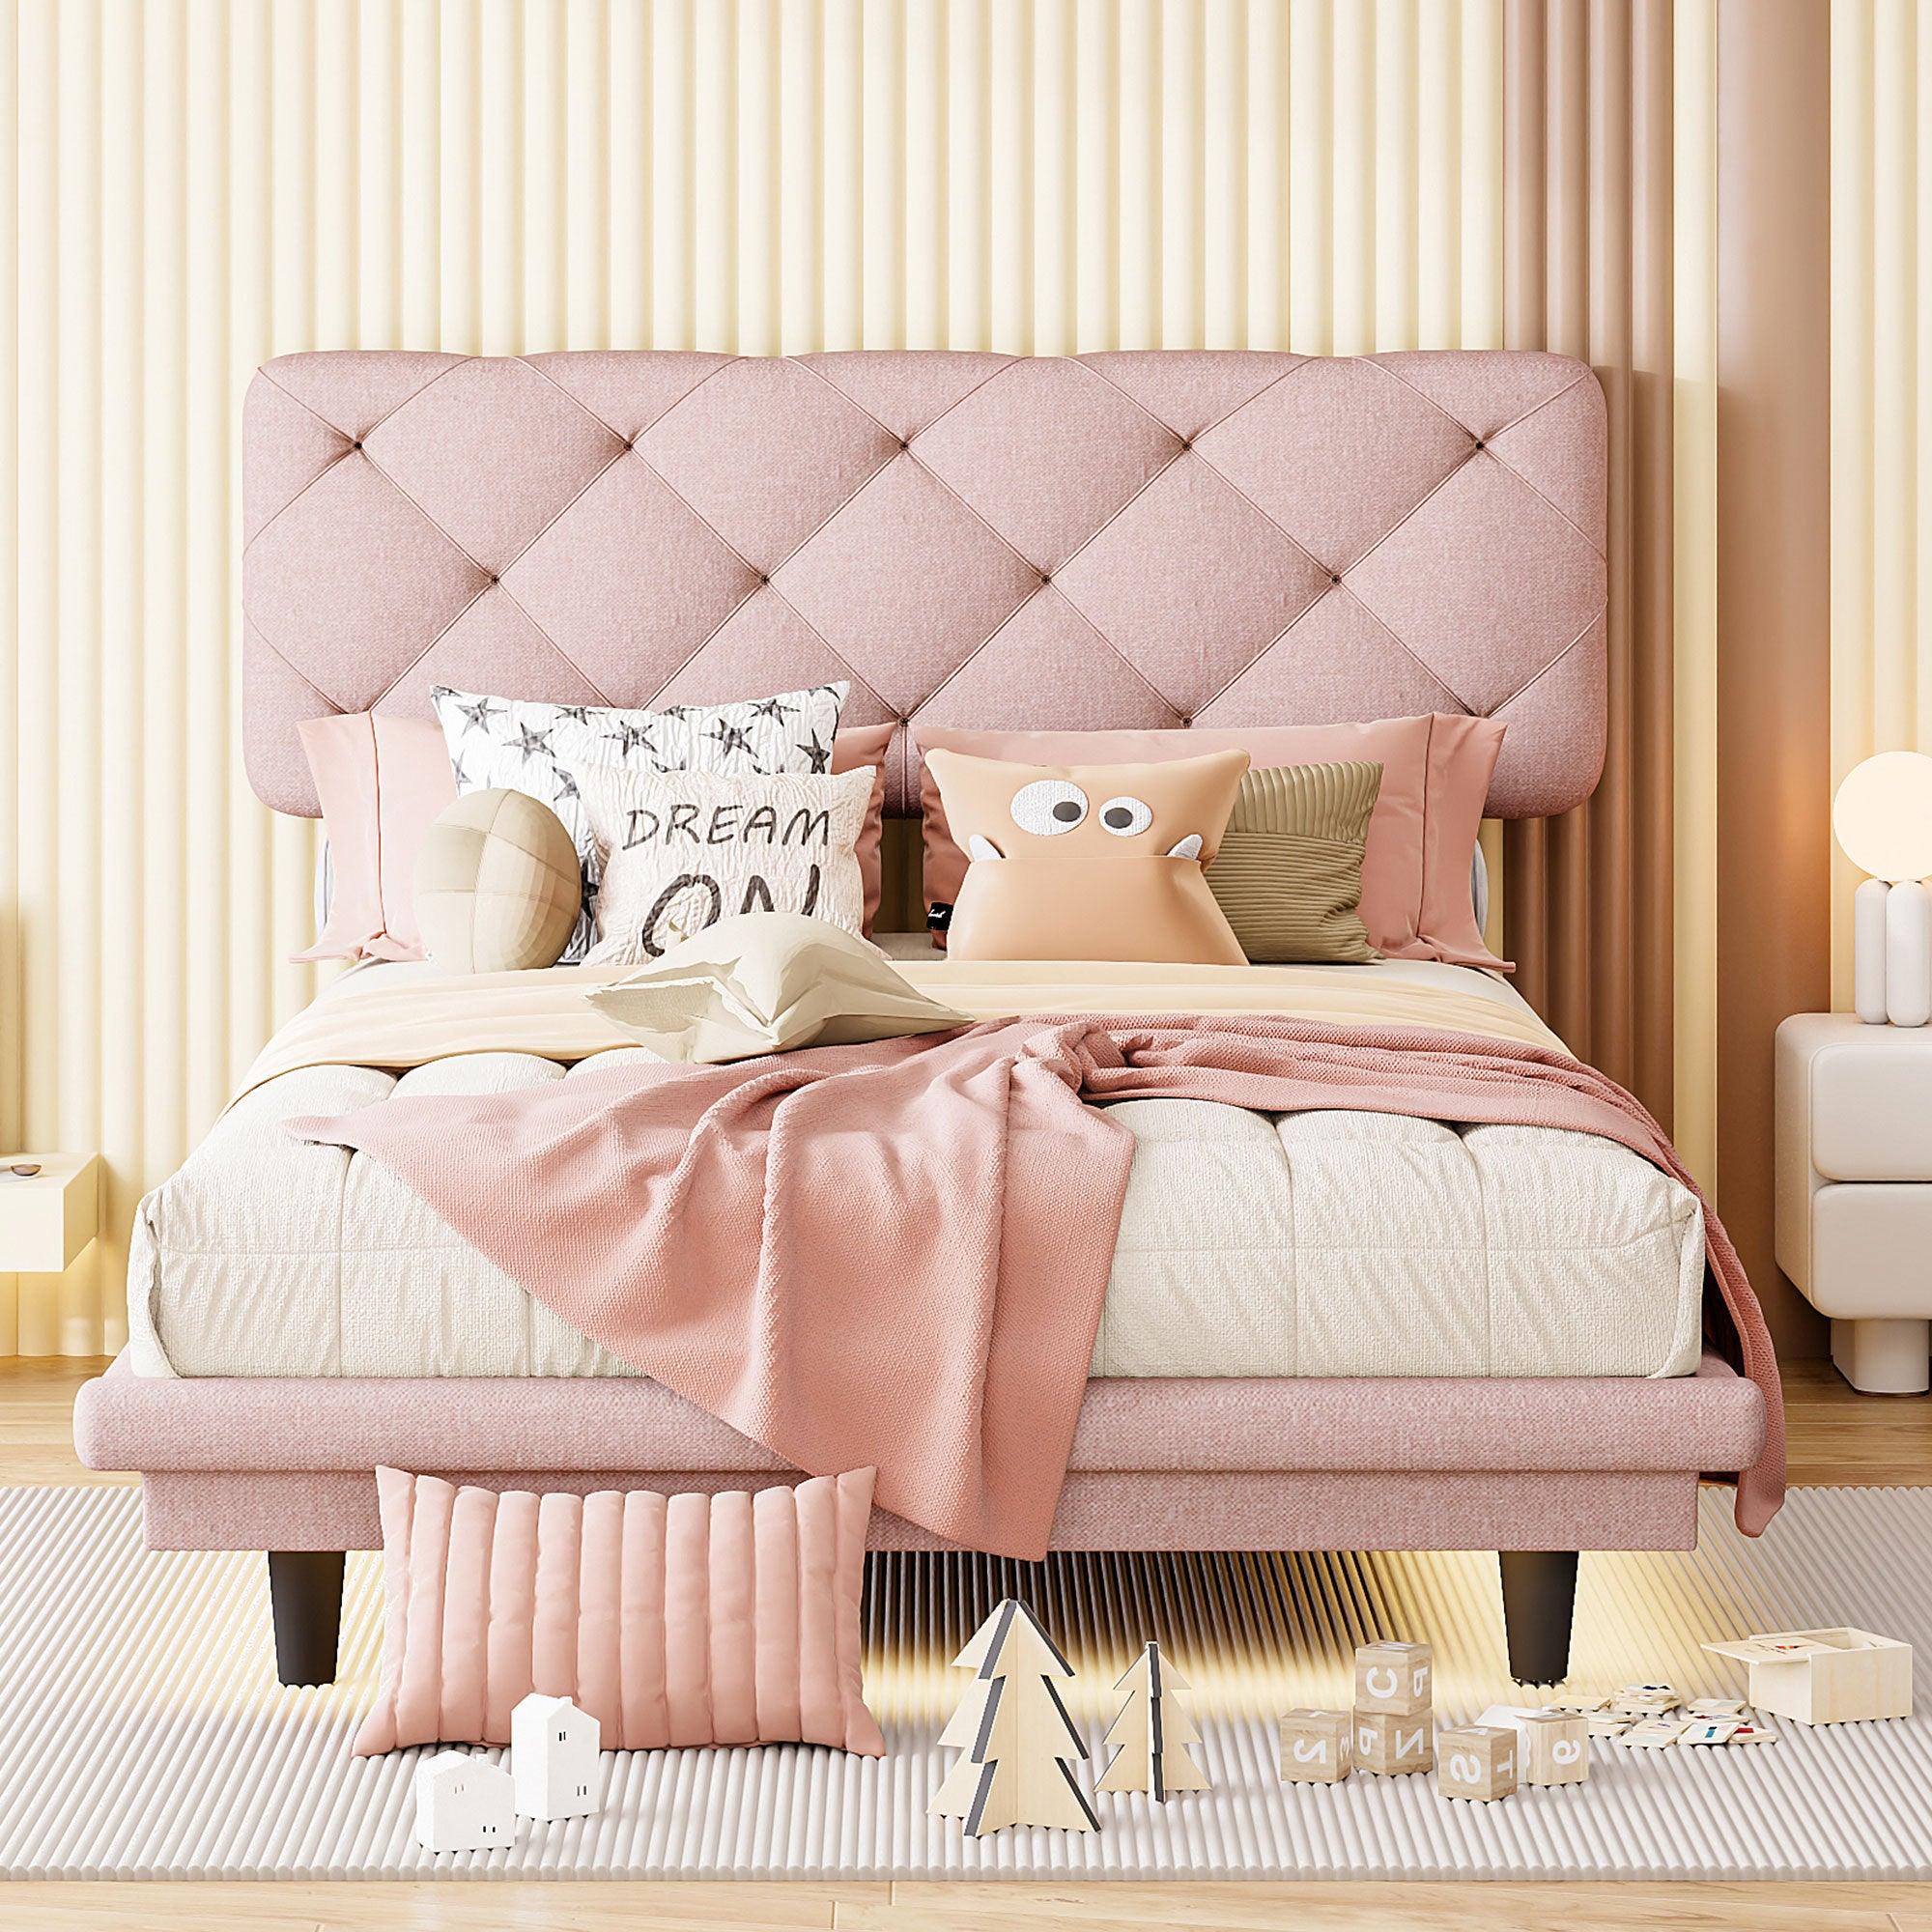 🆓🚛 Twin Size Upholstered Bed With Light Stripe, Floating Platform Bed, Linen Fabric, Pink